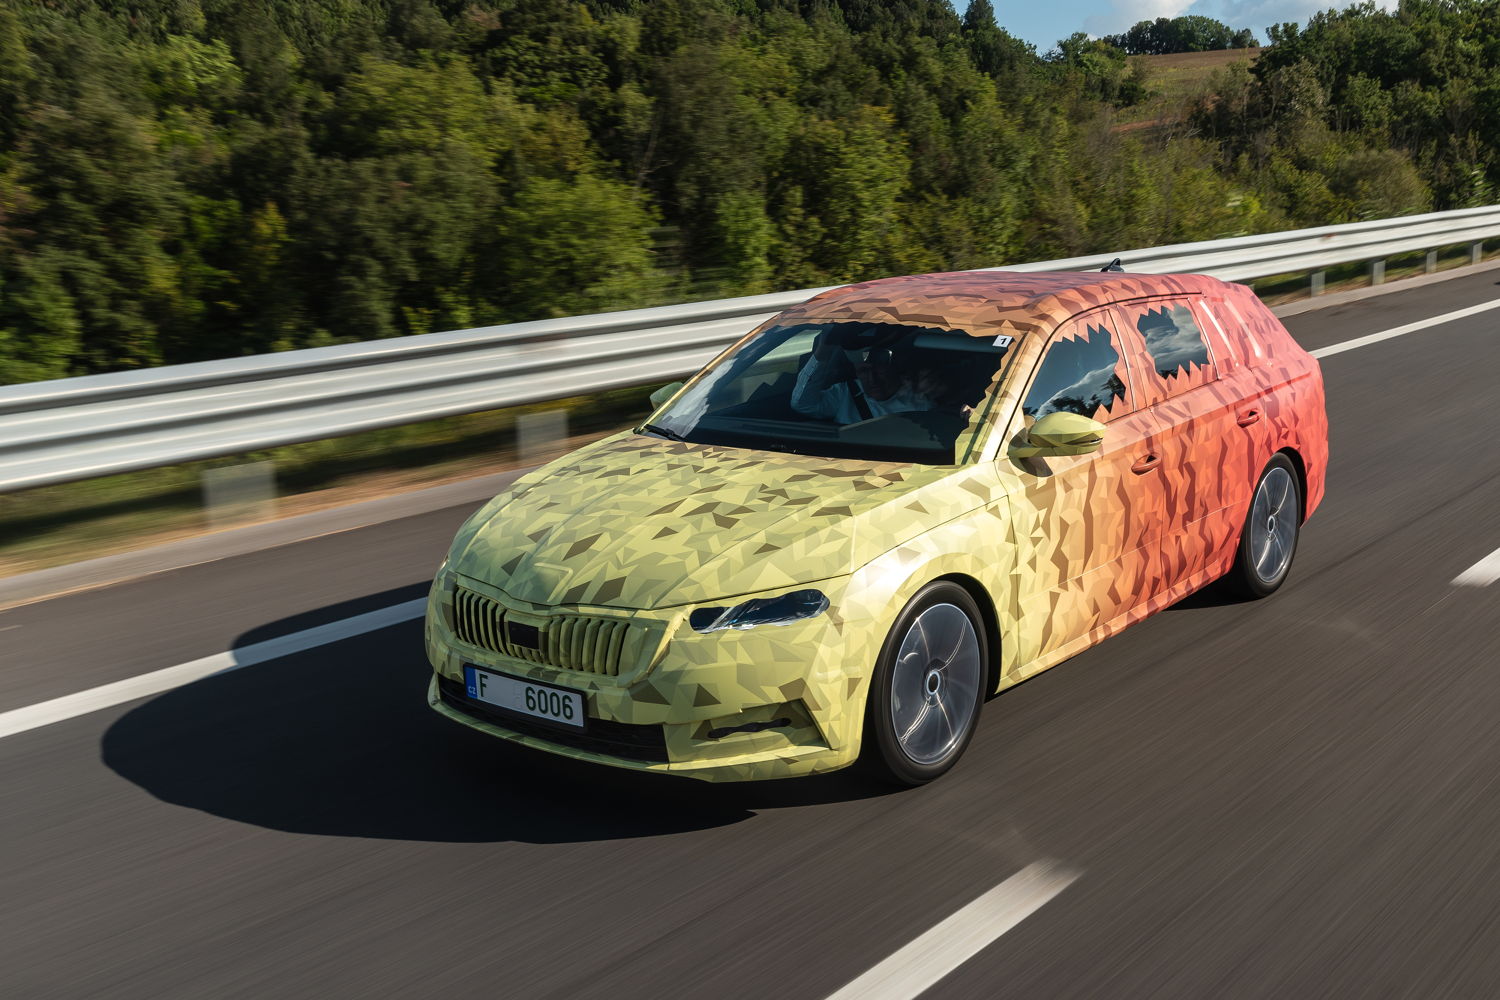 The OCTAVIA is the heart and engine of the ŠKODA brand, an icon and the top volume model. The fourth generation of the ŠKODA OCTAVIA has grown in size, is therefore longer and wider than its predecessor.